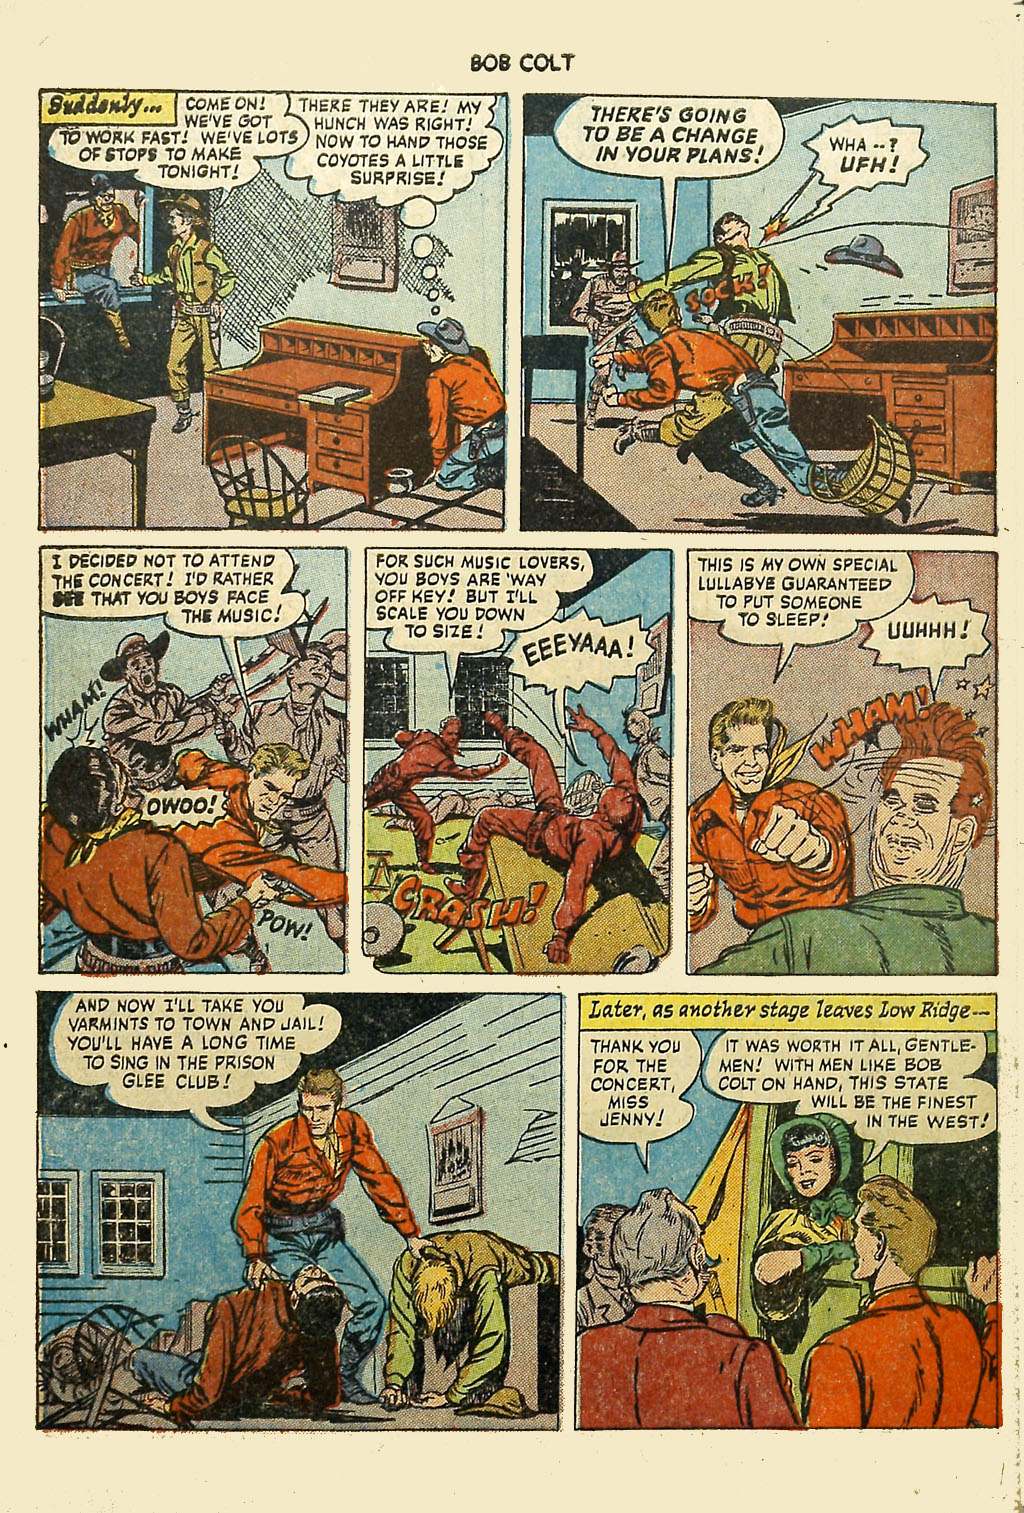 Read online Bob Colt Western comic -  Issue #2 - 34